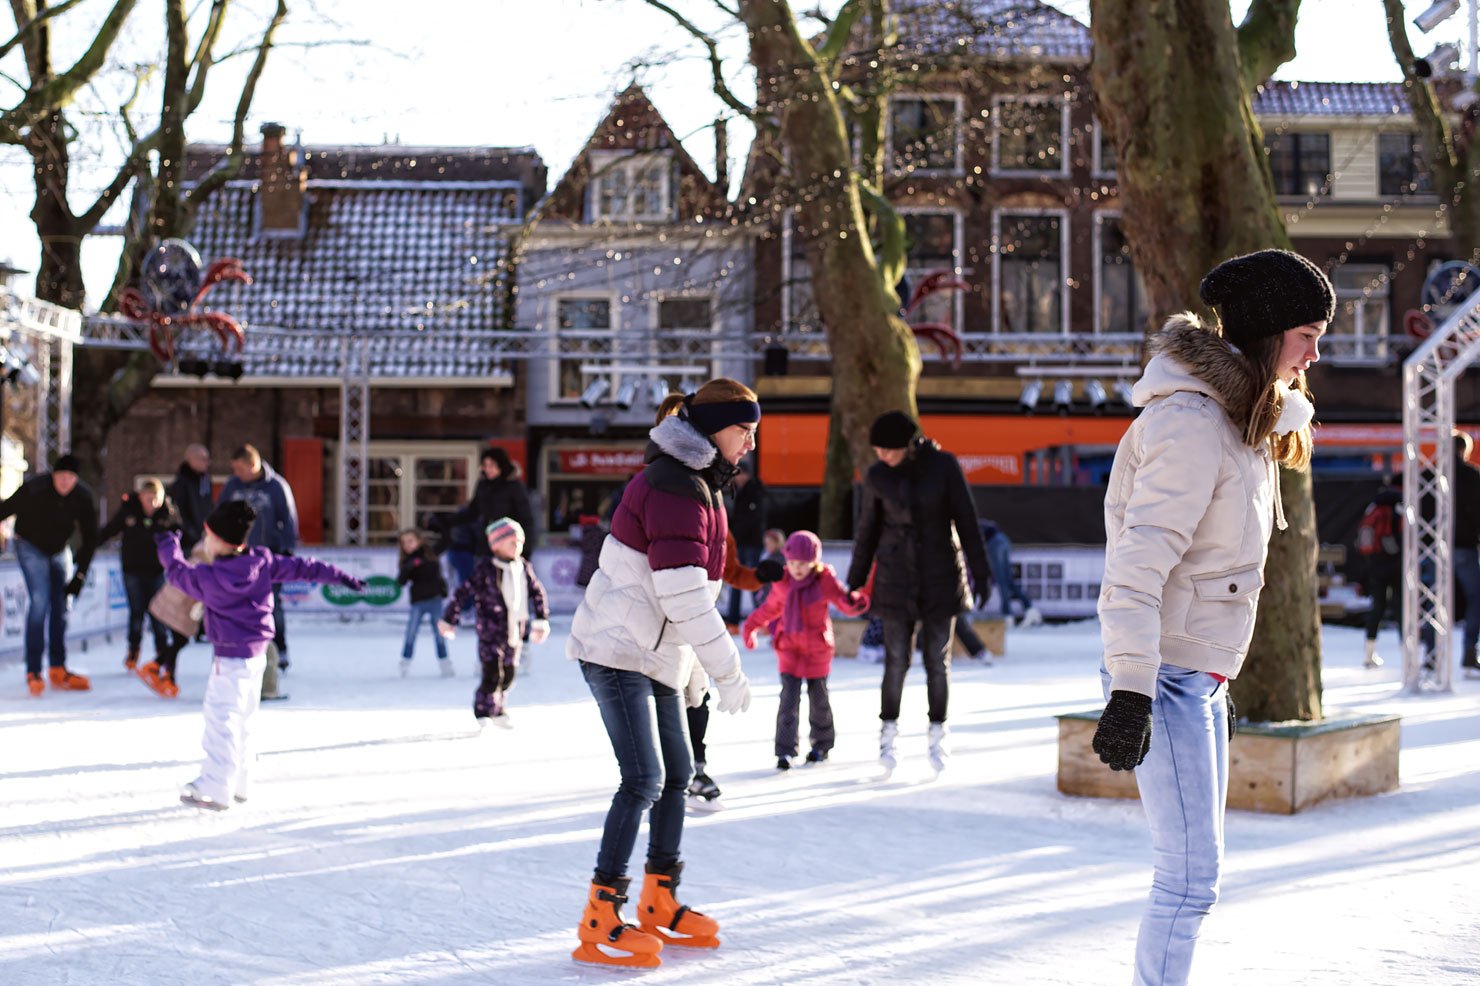 Ice skating at the Beestenmarkt in Delft, the Netherlands